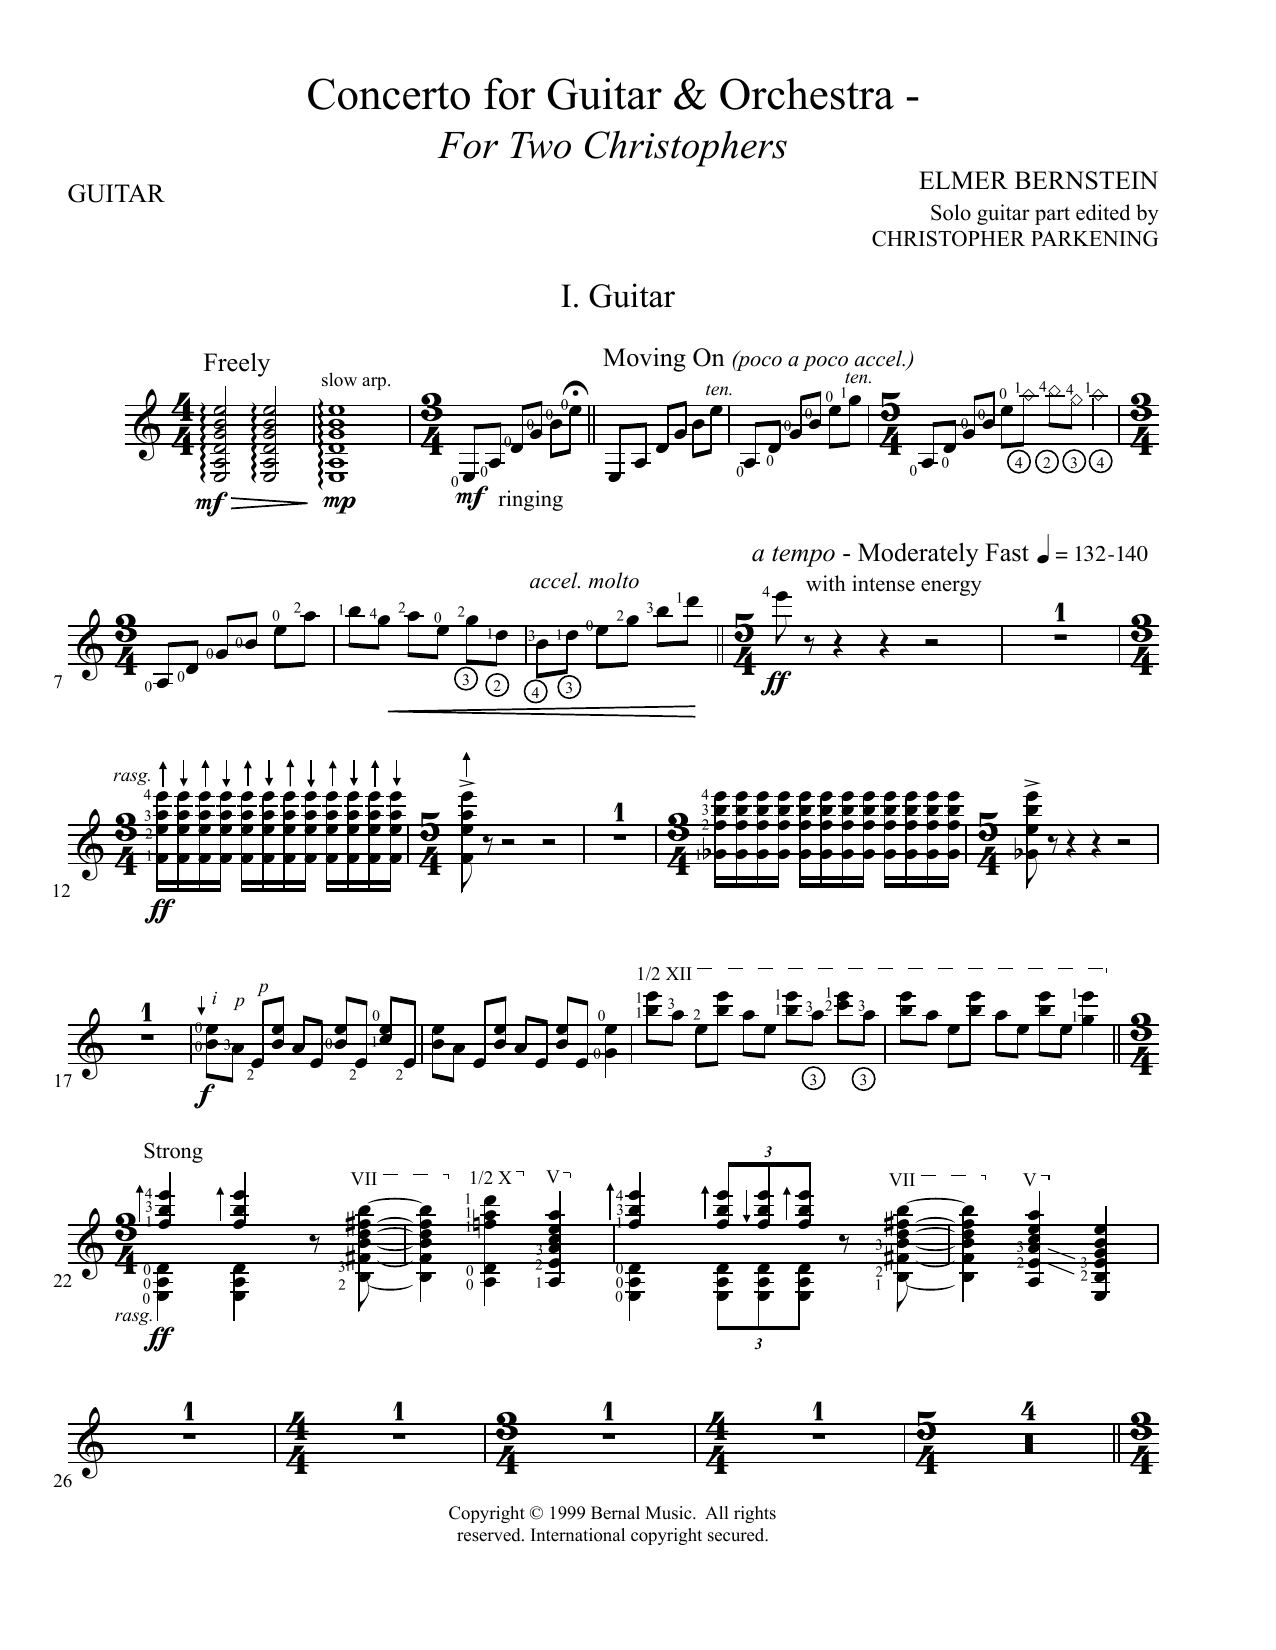 Elmer Bernstein Concerto For Guitar And Orchestra - For Two Christophers sheet music notes and chords. Download Printable PDF.